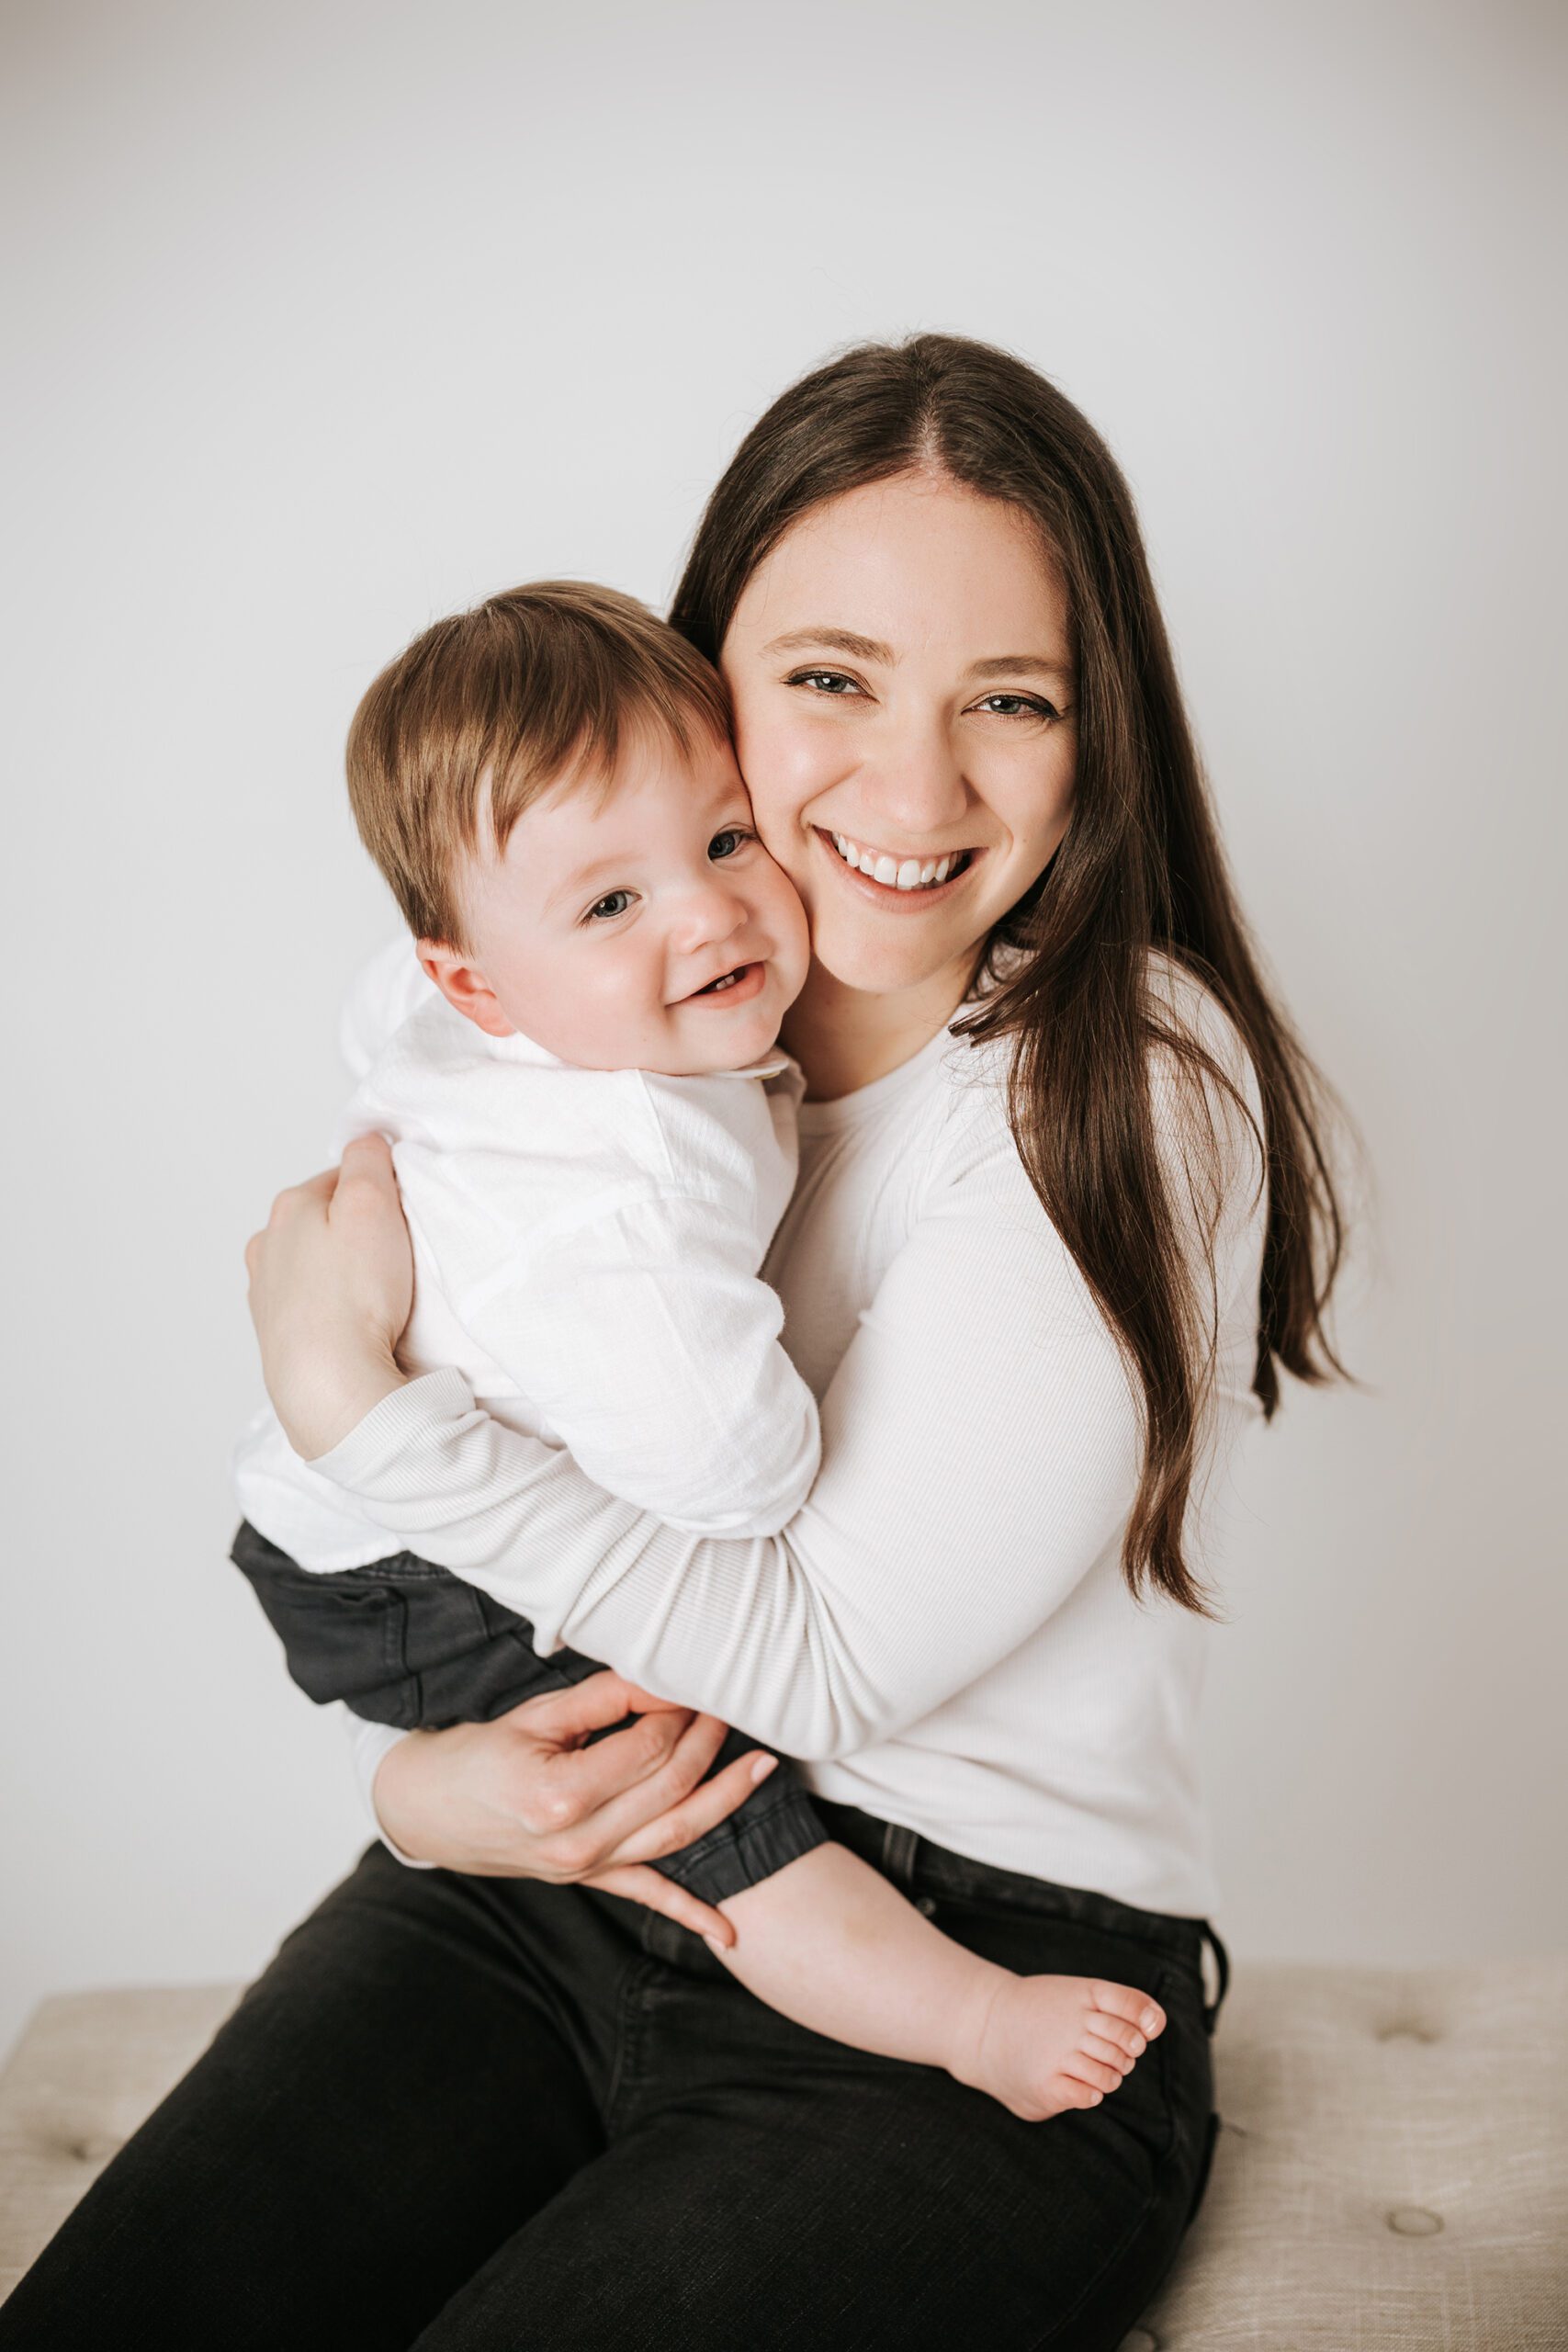 cary baby photographer Laura Karoline phography, mom hugging one year old son